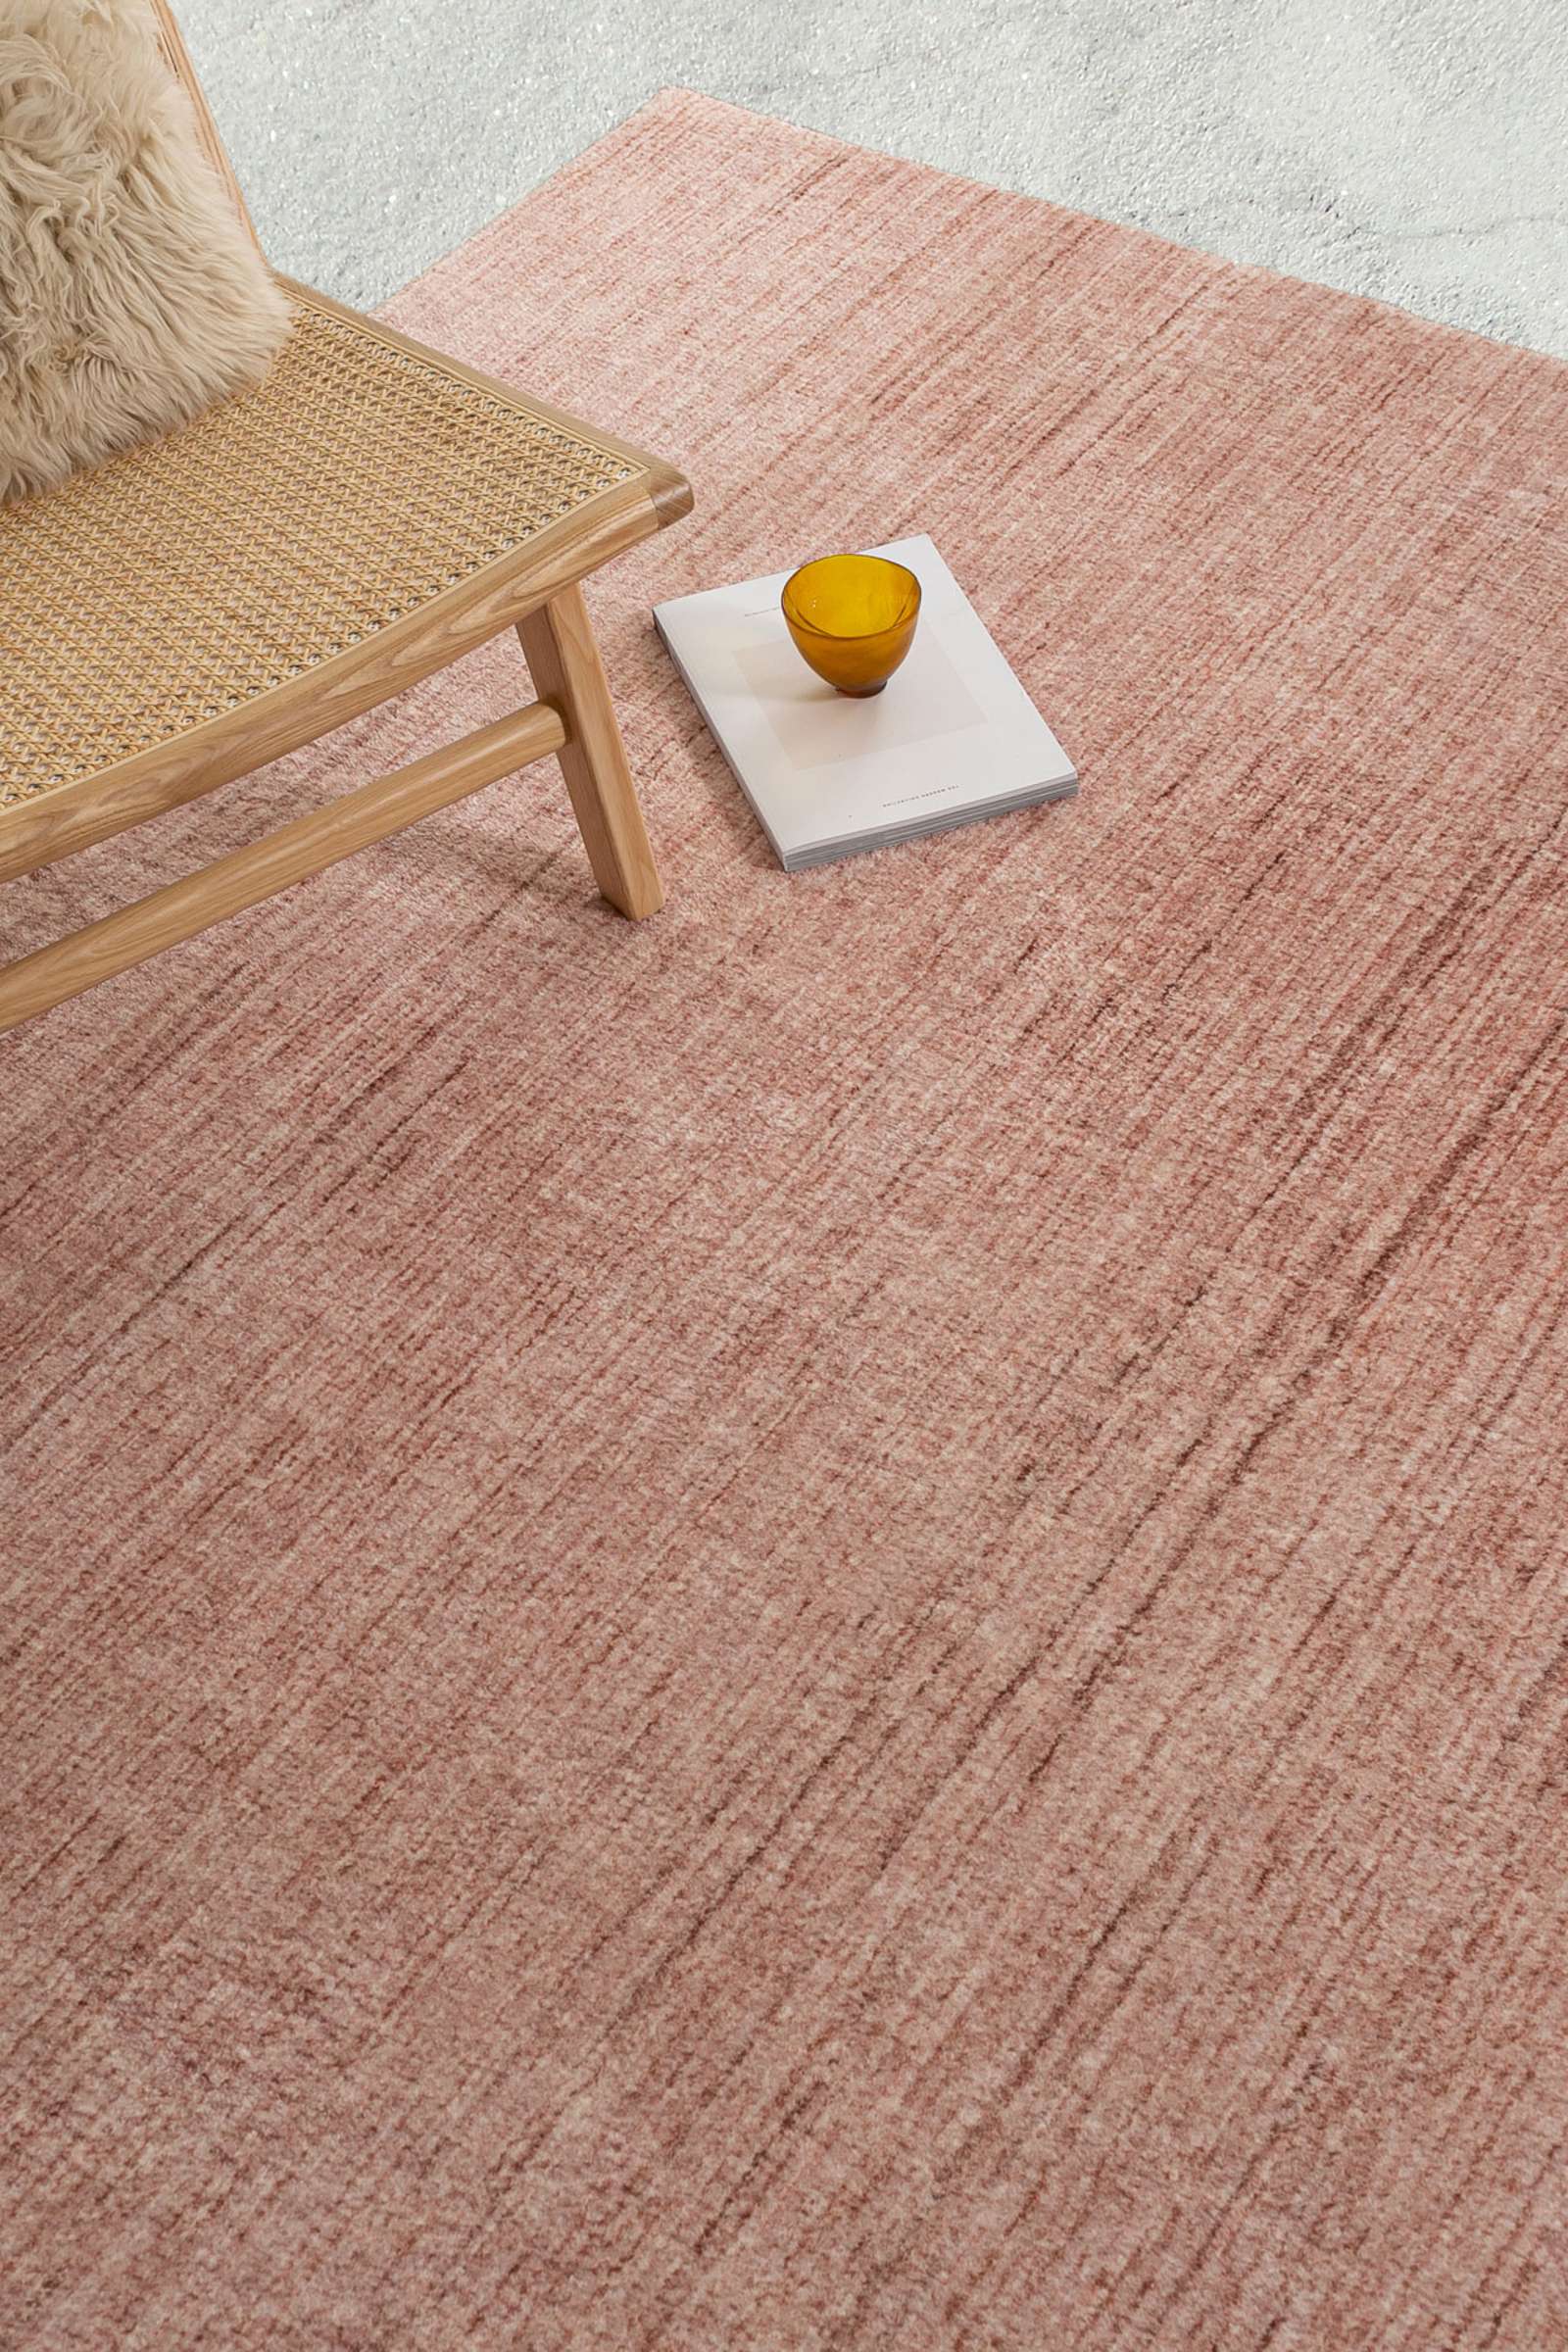 Discovering Machine-Washable Rugs: Styles and Materials for Effortless Cleaning